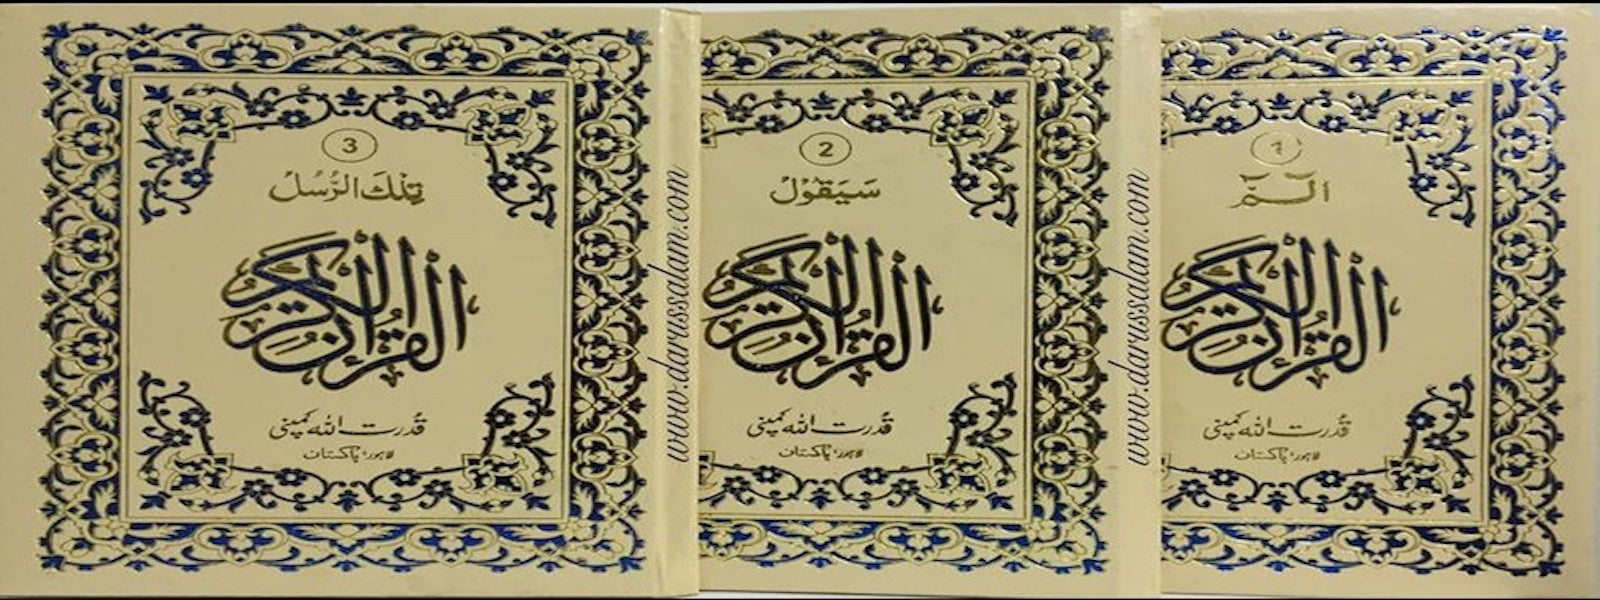 Quran Chapters